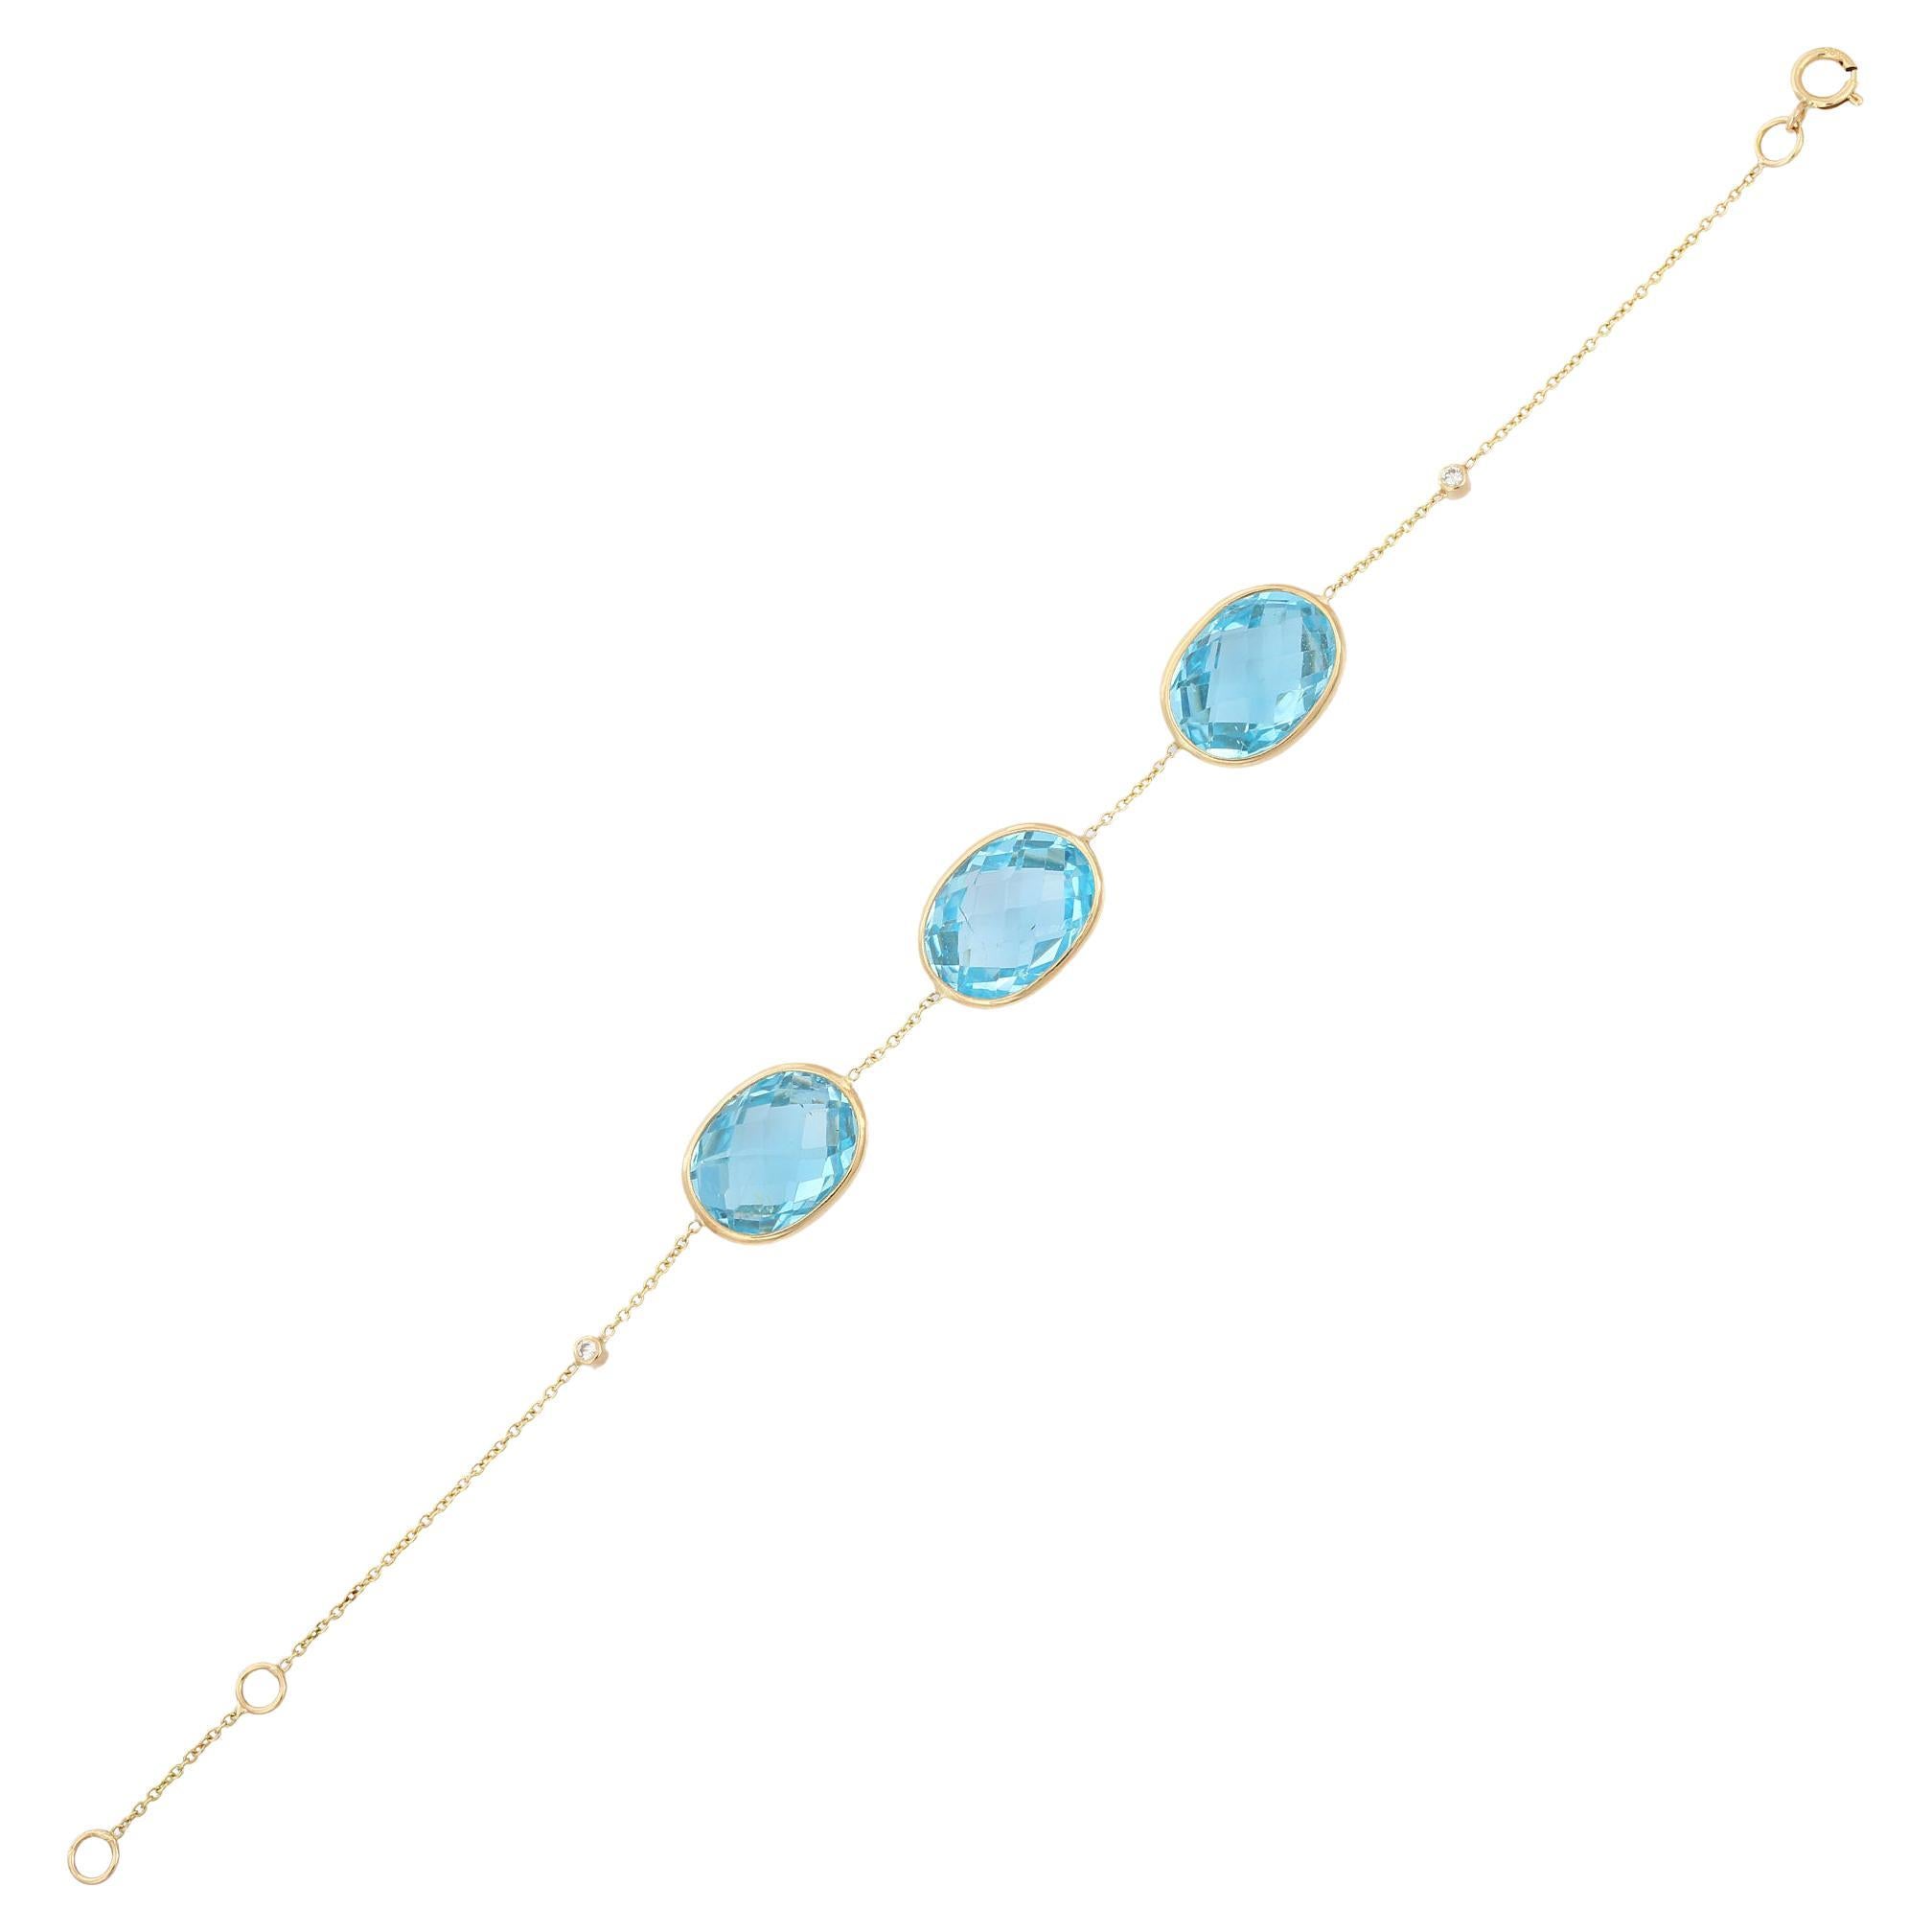 Bracelets are worn to enhance the look. Women love to look good. It is common to see a woman rocking a lovely gold bracelet on her wrist. A gold gemstone bracelet is the ultimate statement piece for every stylish woman.
Adorn your wrist with this